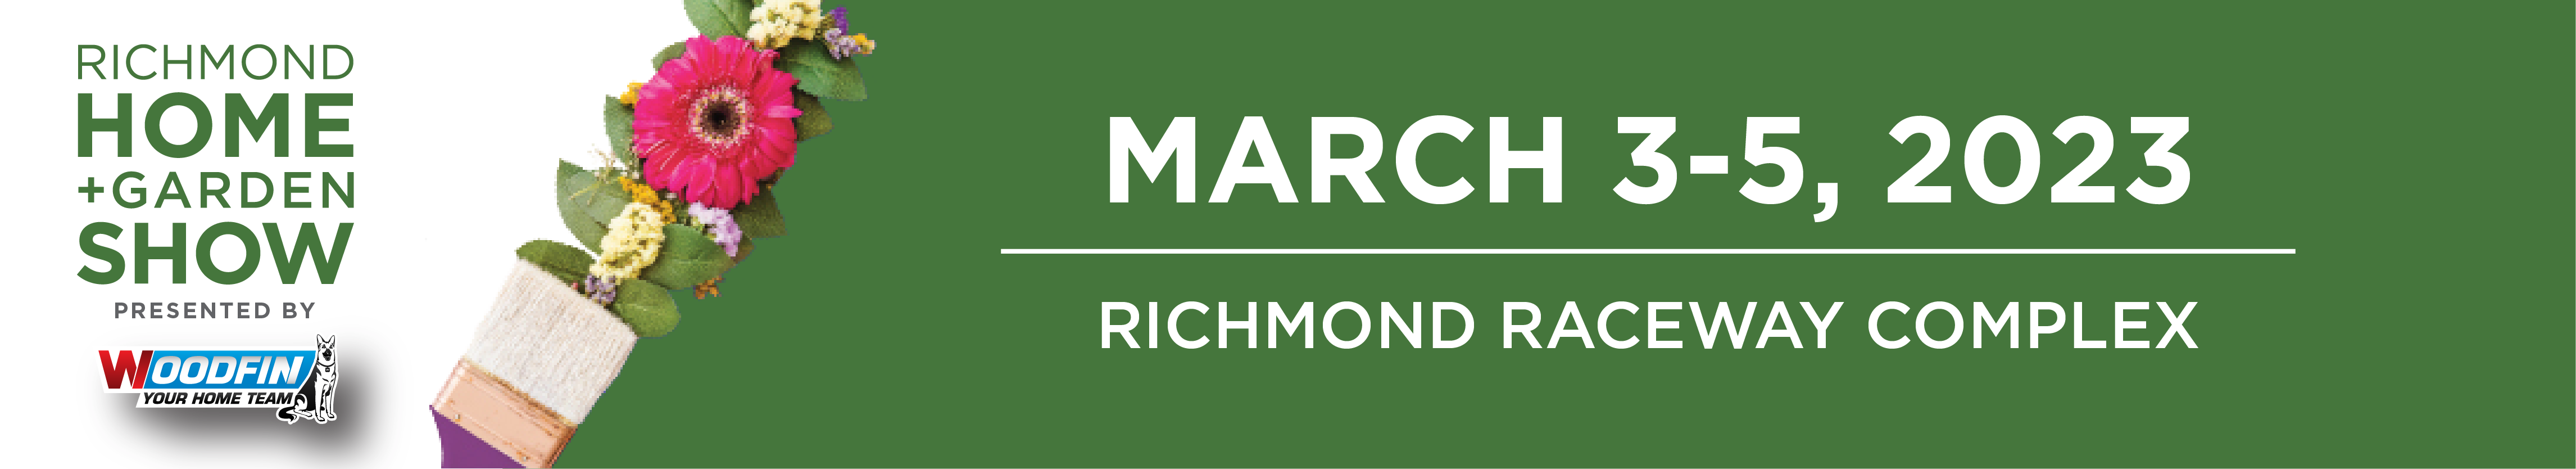 Richmond Home + Garden Show 2023 presented by Woodfin Your Home Team